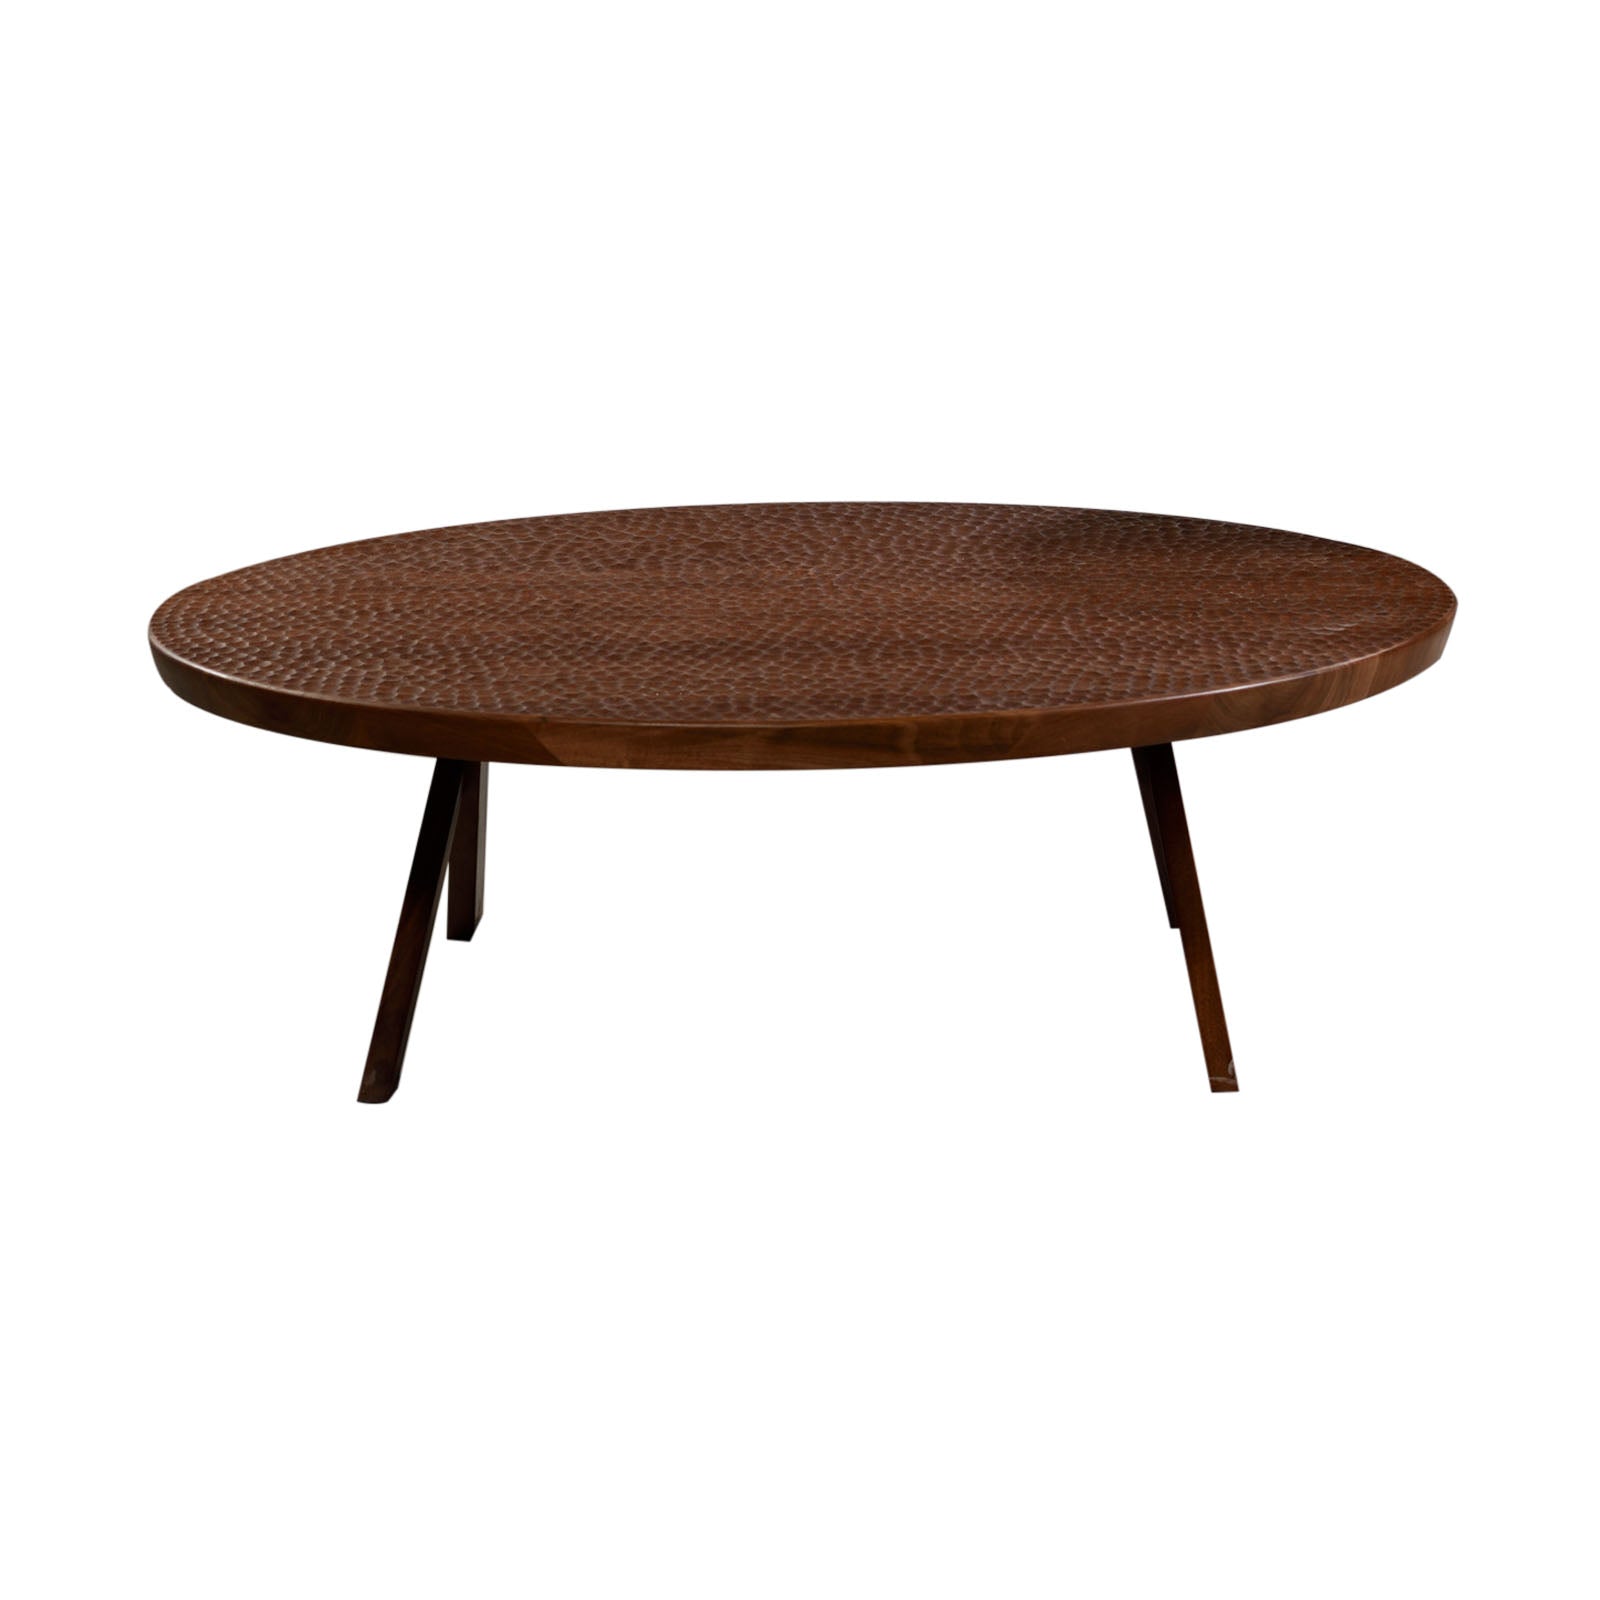 Touch Coffee Table: Large - 43.3